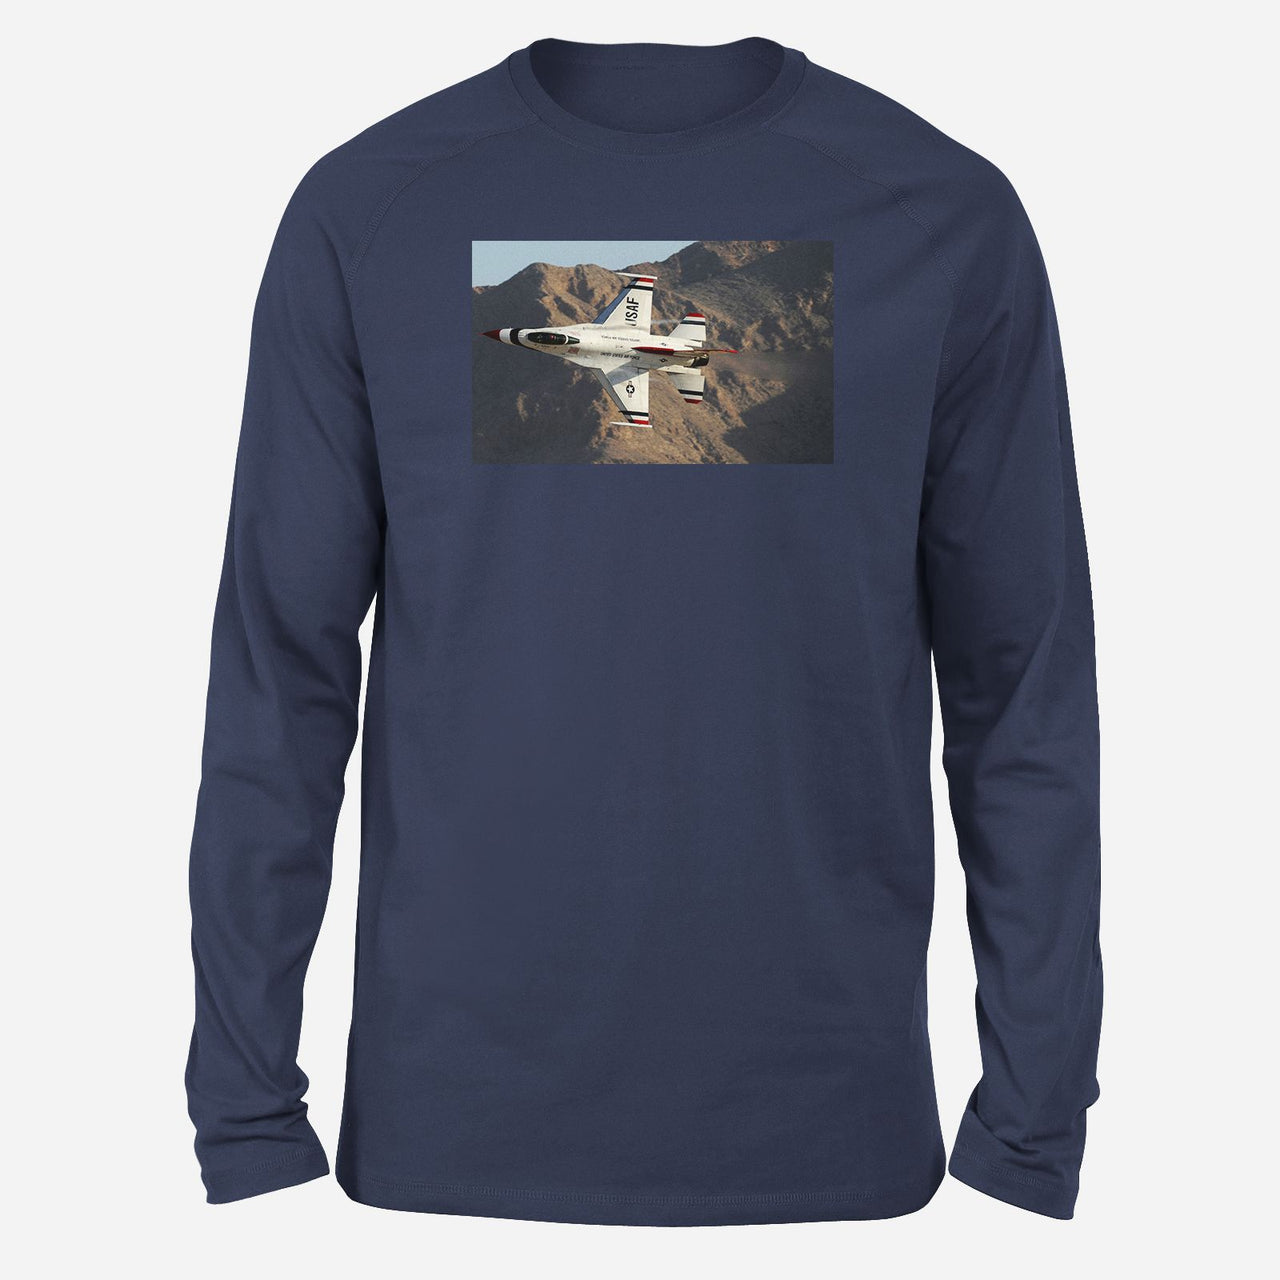 Amazing Show by Fighting Falcon F16 Designed Long-Sleeve T-Shirts